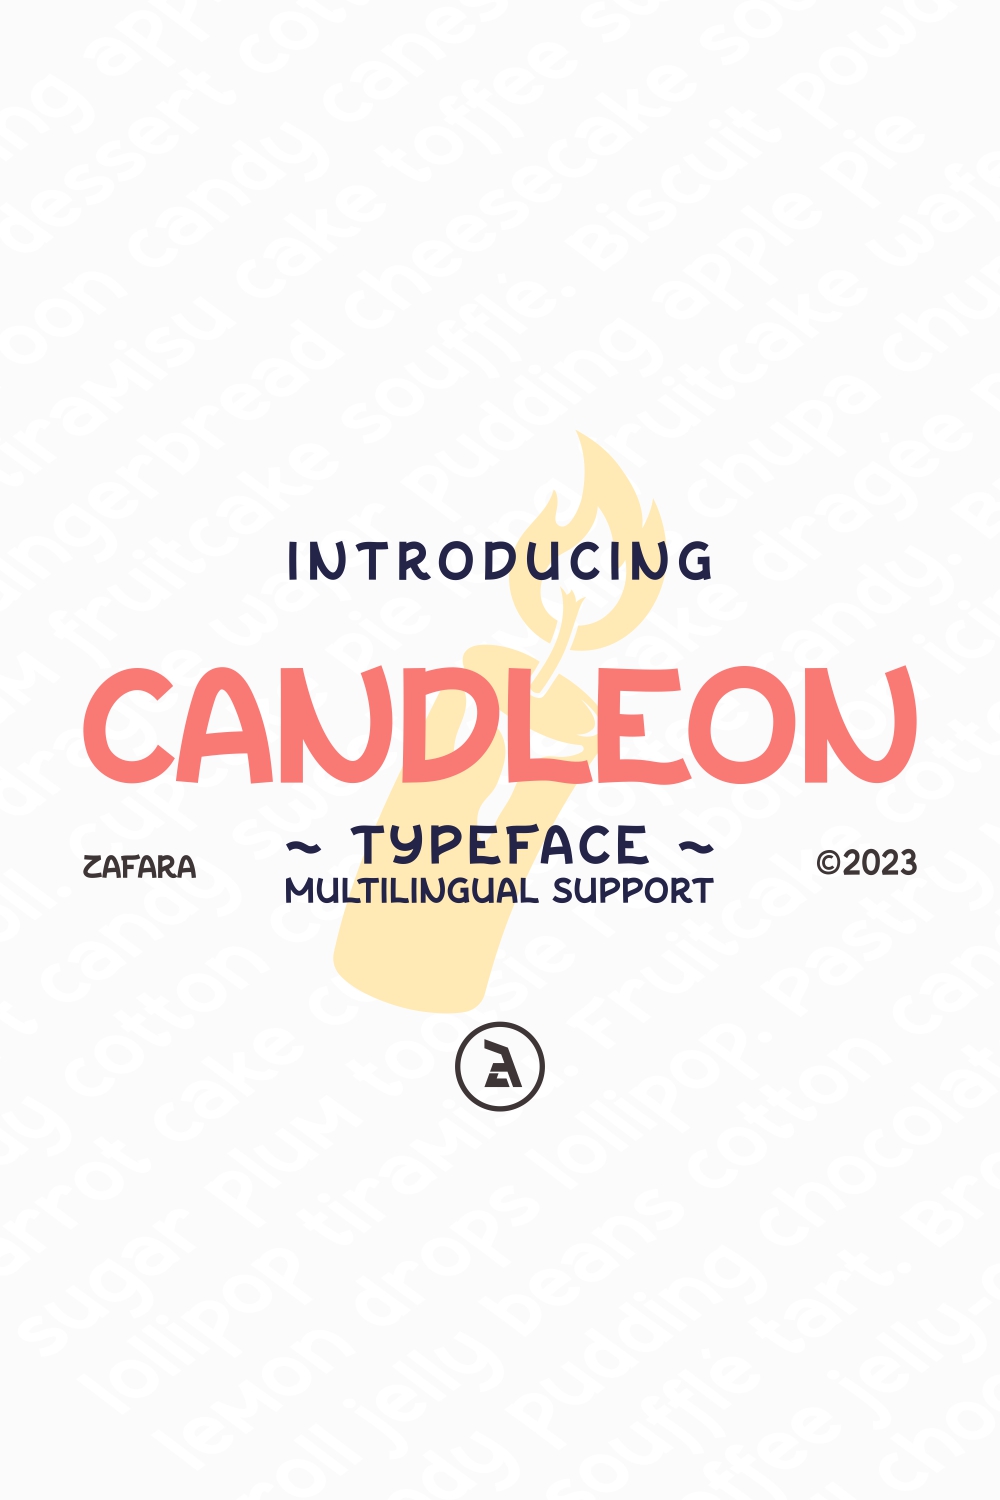 CANDLEON Typeface pinterest preview image.